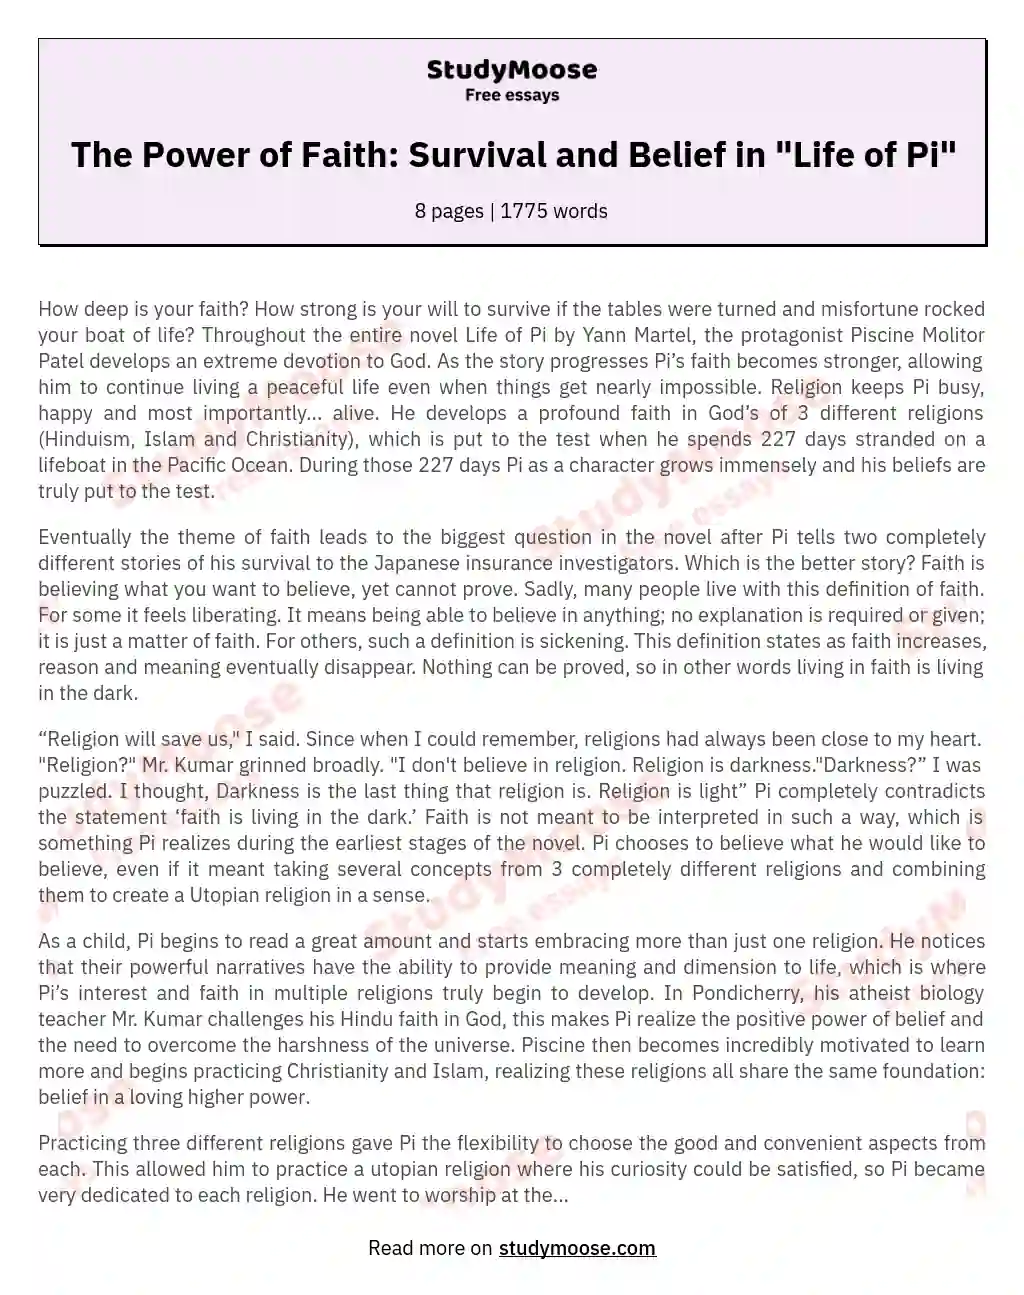 The Power of Faith: Survival and Belief in "Life of Pi" essay